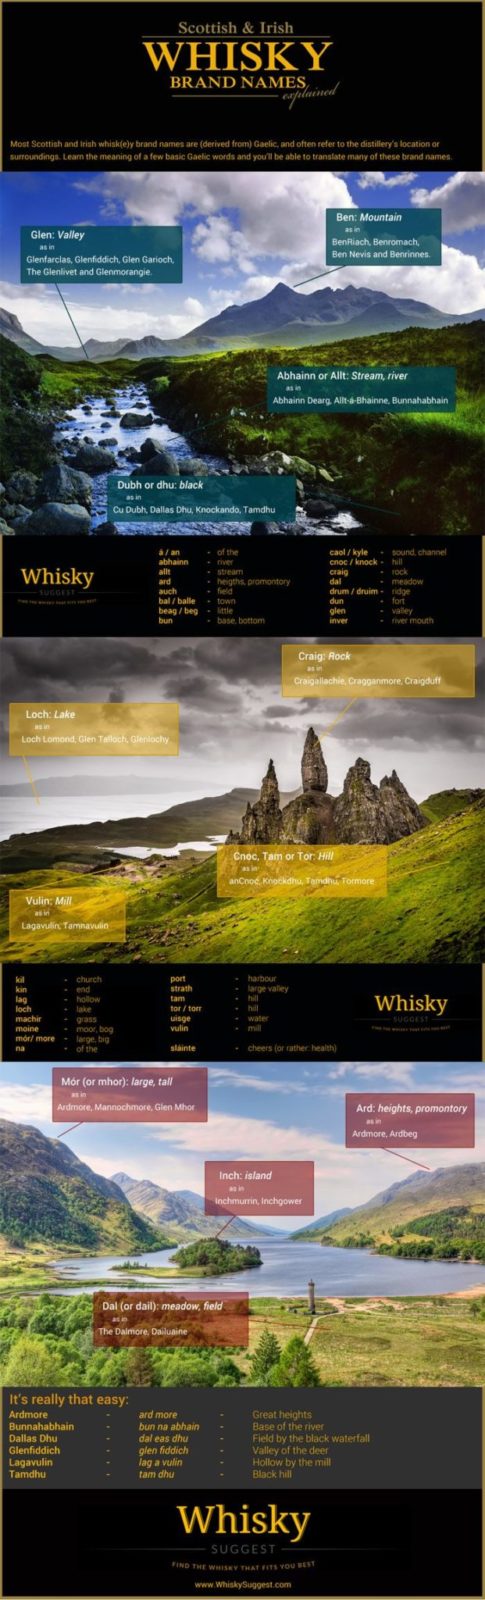 Picture: WhiskySuggest.com